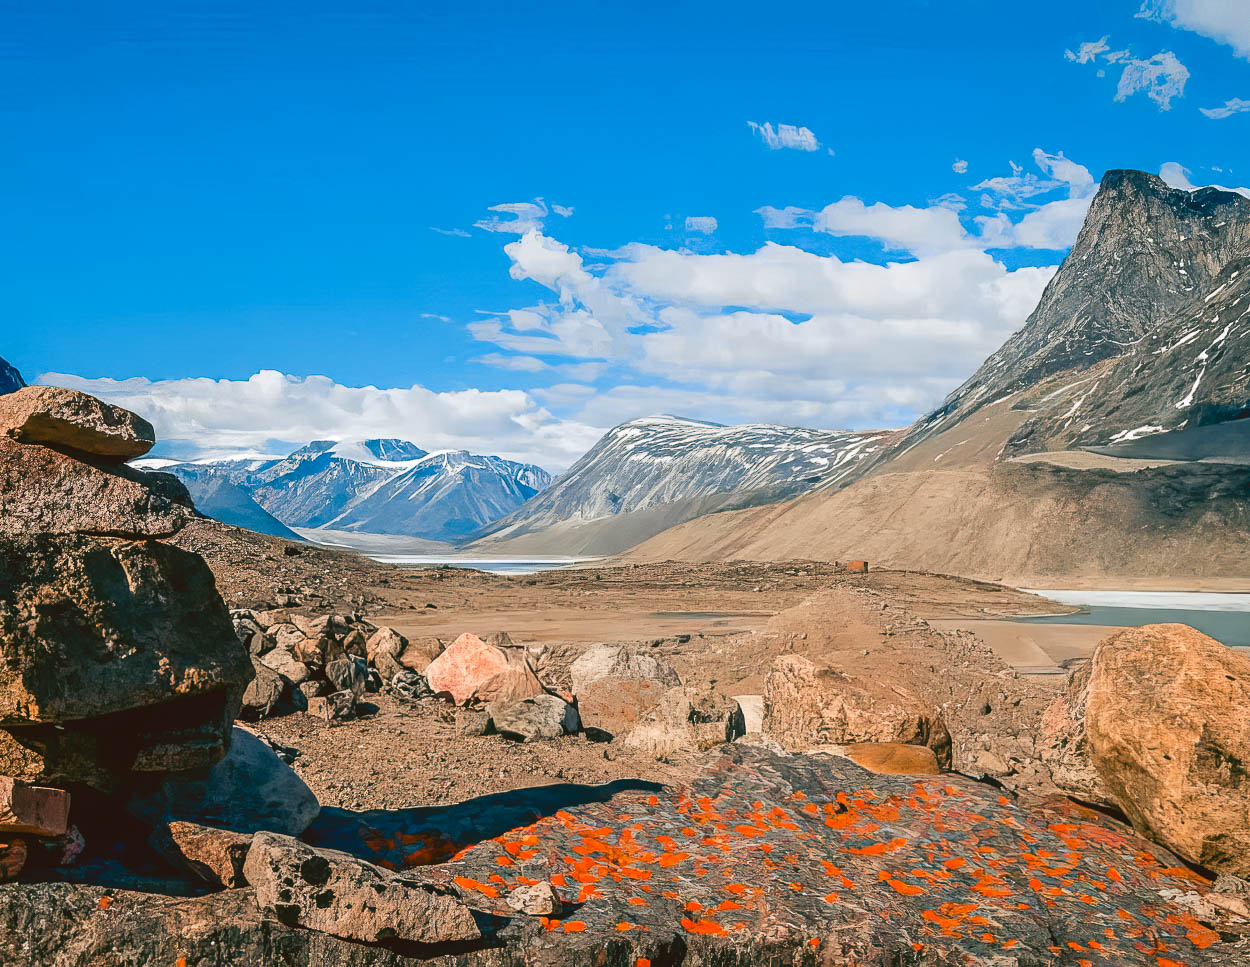 From stunning national parks like Auyuittuq National Park to bustling towns like Iqaluit, Films.Solutions can help you find the perfect location for your film project in Nunavut